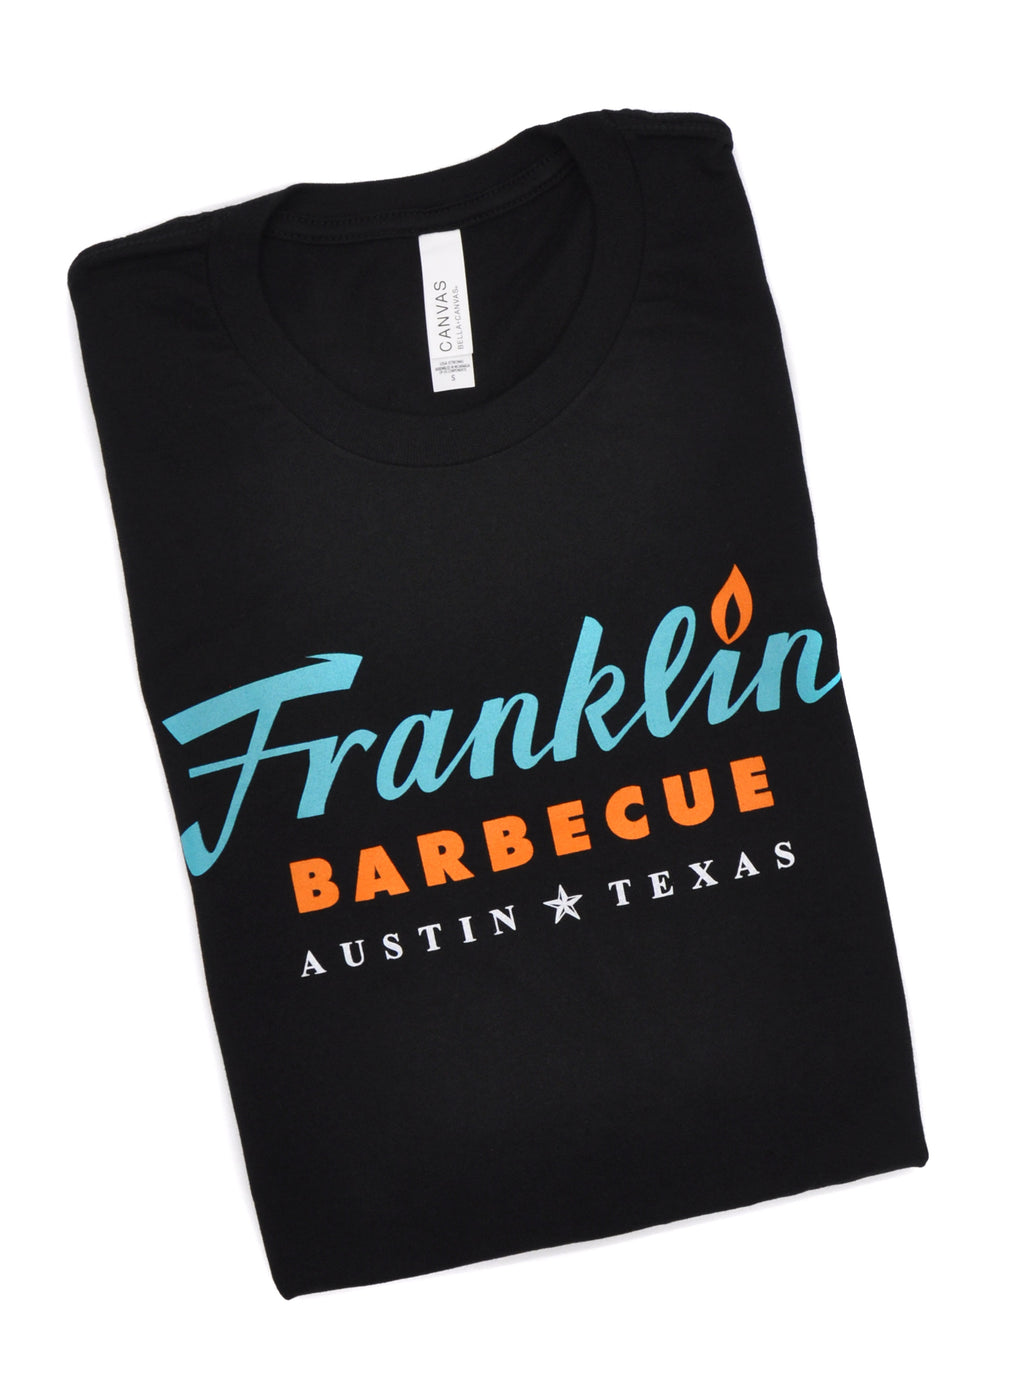 Black t-shirt with Franklin Barbecue text logo in blue and orange. Below that is Austin Texas in white.